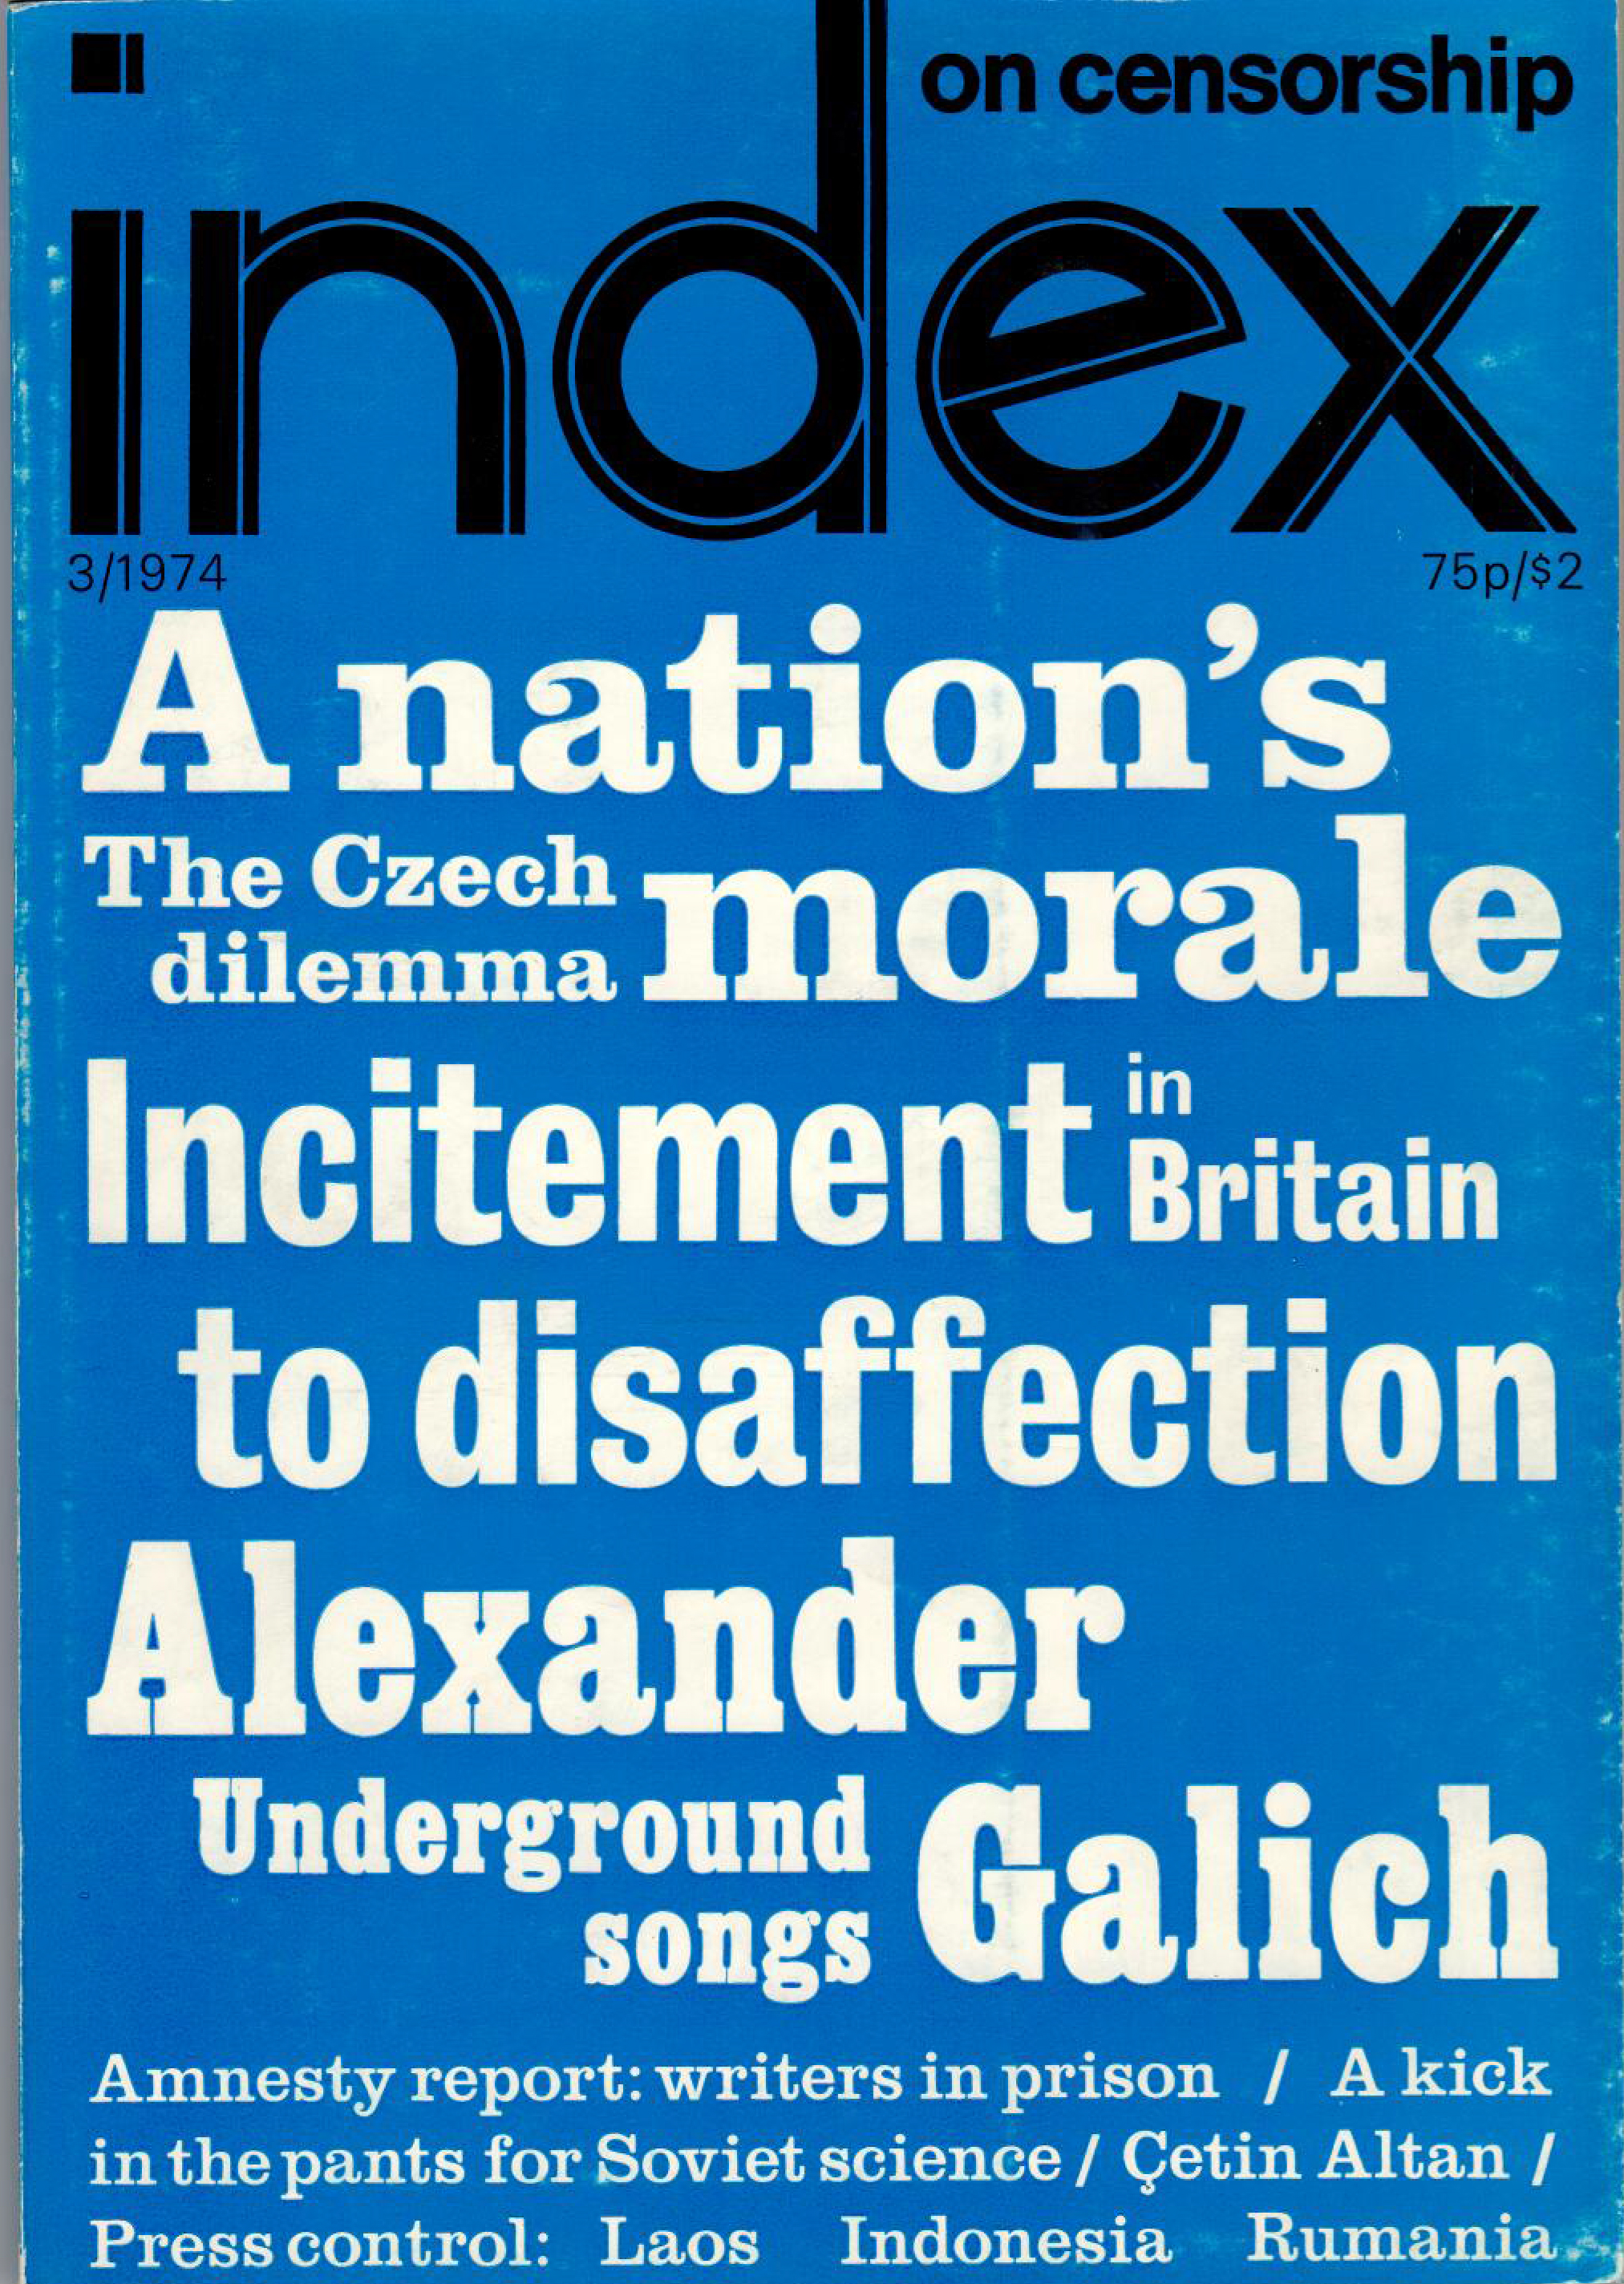 Preserving a nation's morale, the Autumn 1974 issue of Index on Censorship magazine